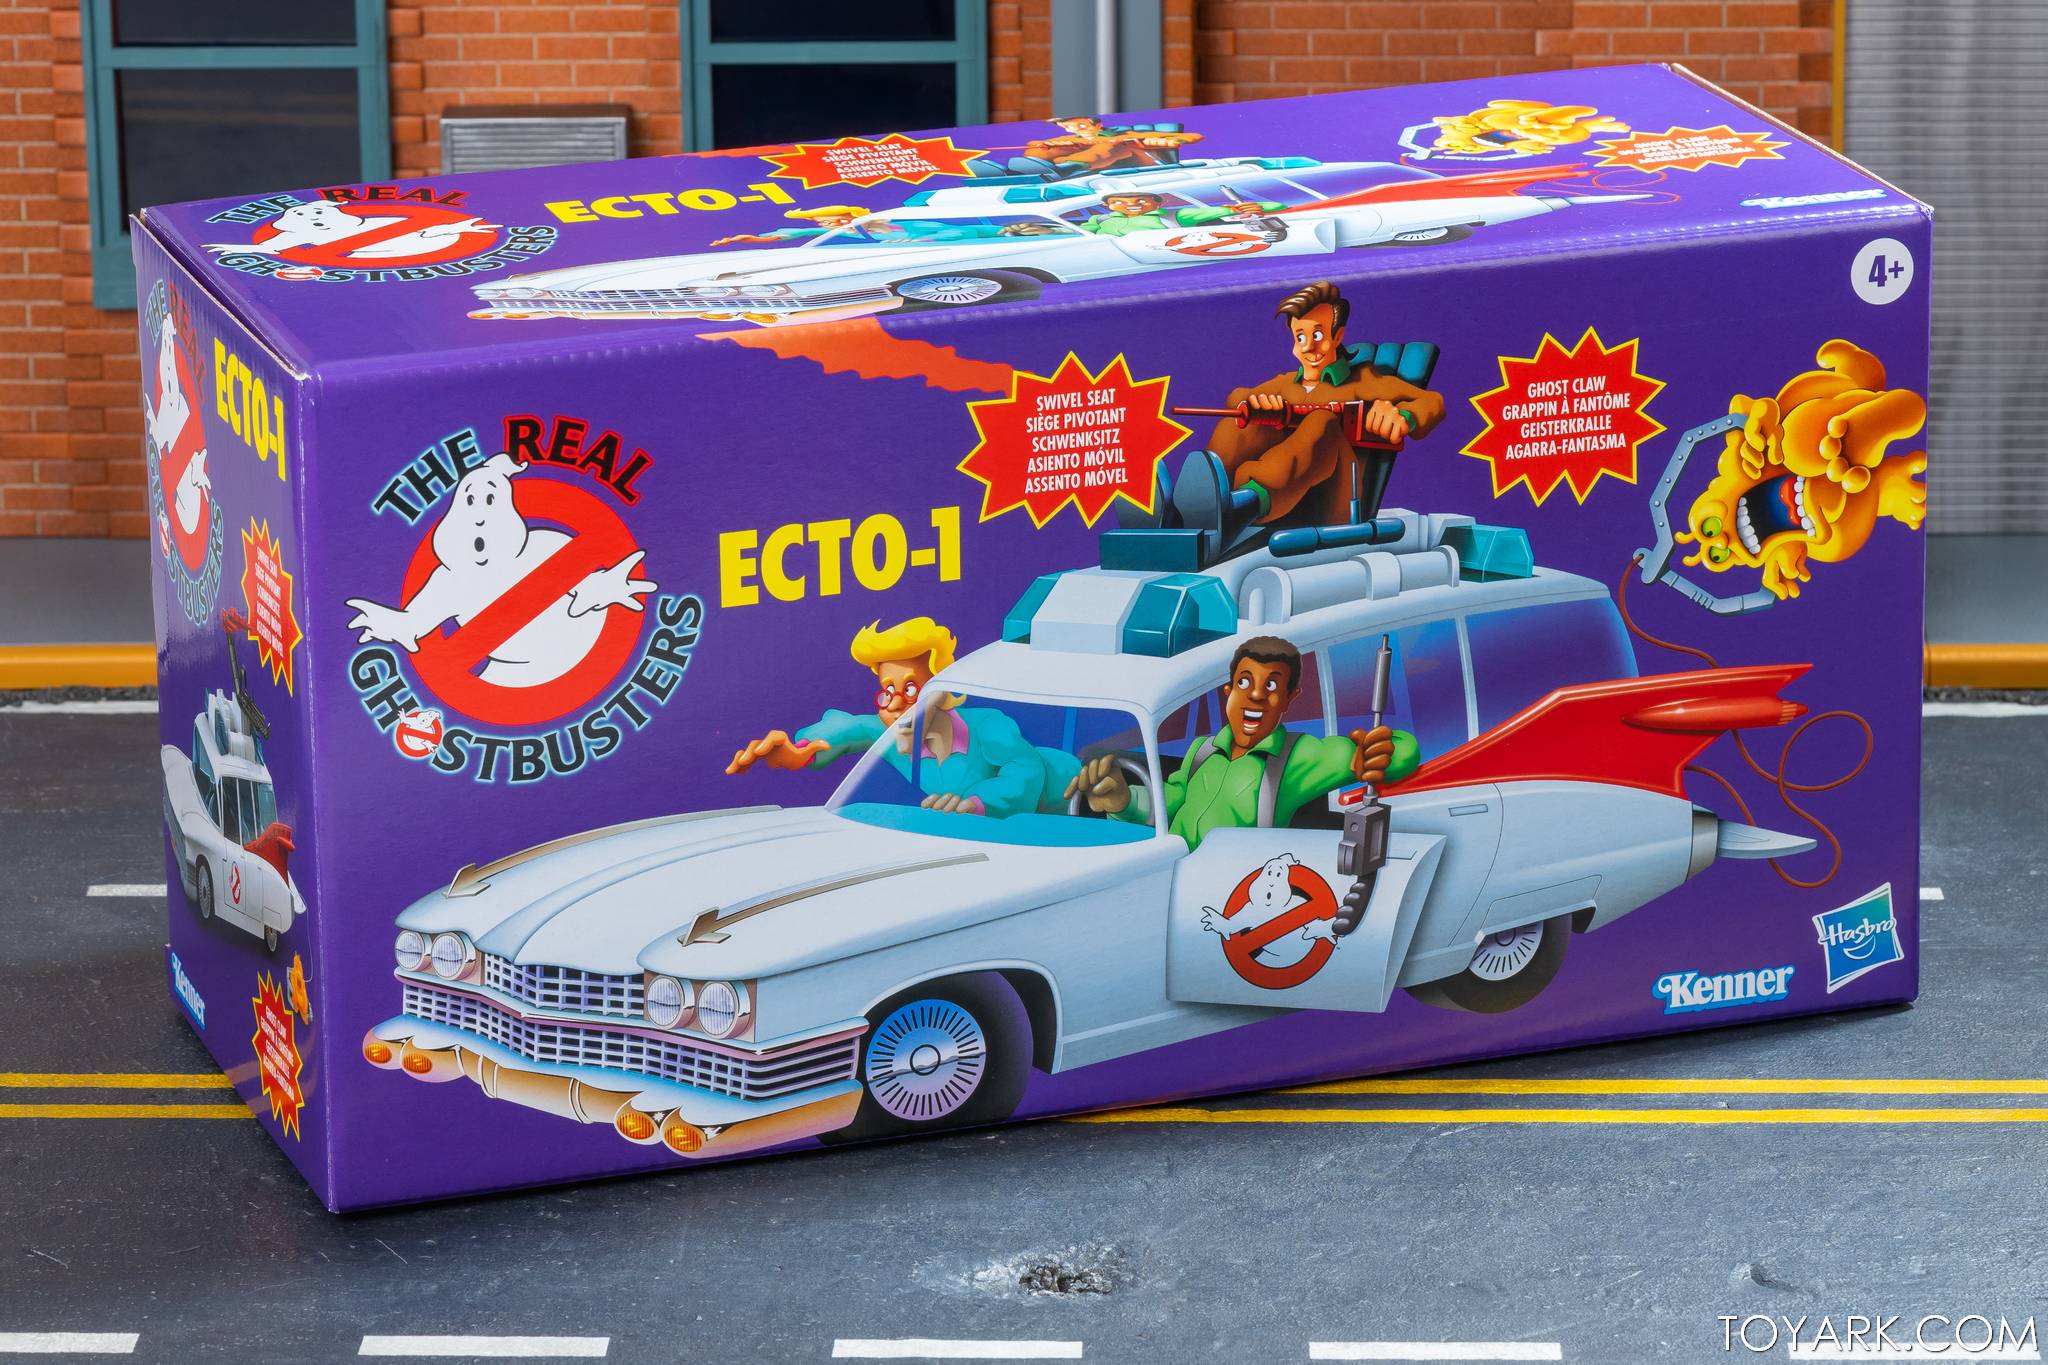 Ghostbusters Ecto-1 toy car by Kenner Hasbro.